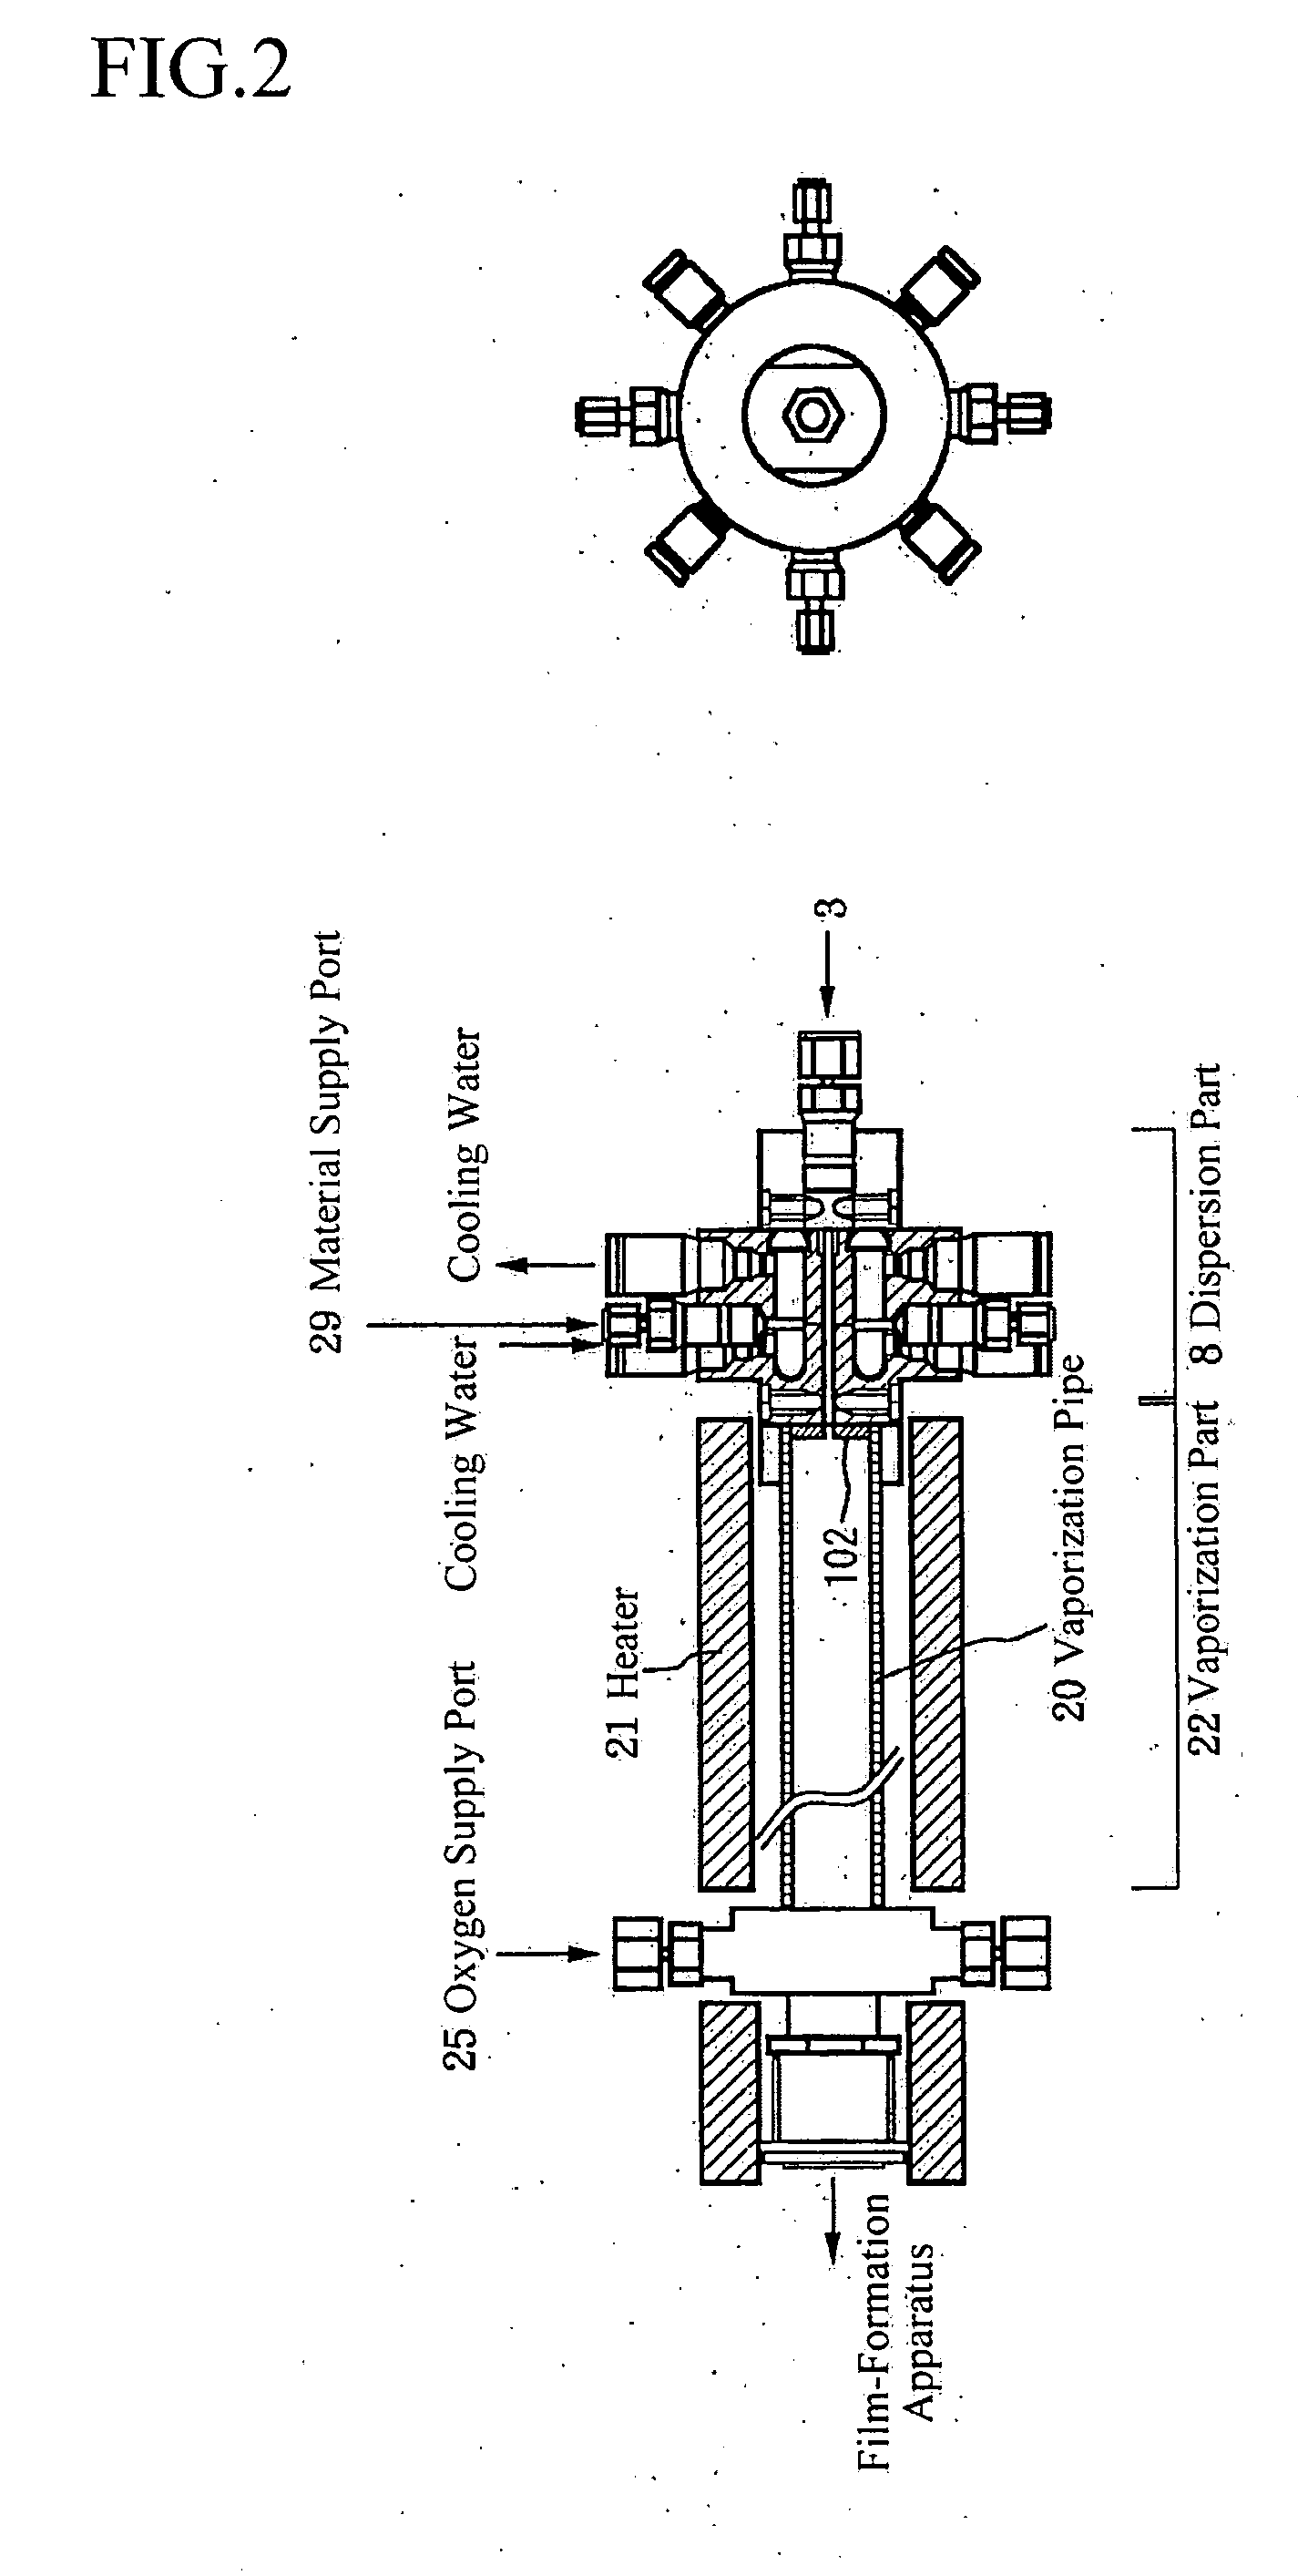 Vaporizer, film forming apparatus including the same, method of vaporization and method of forming film